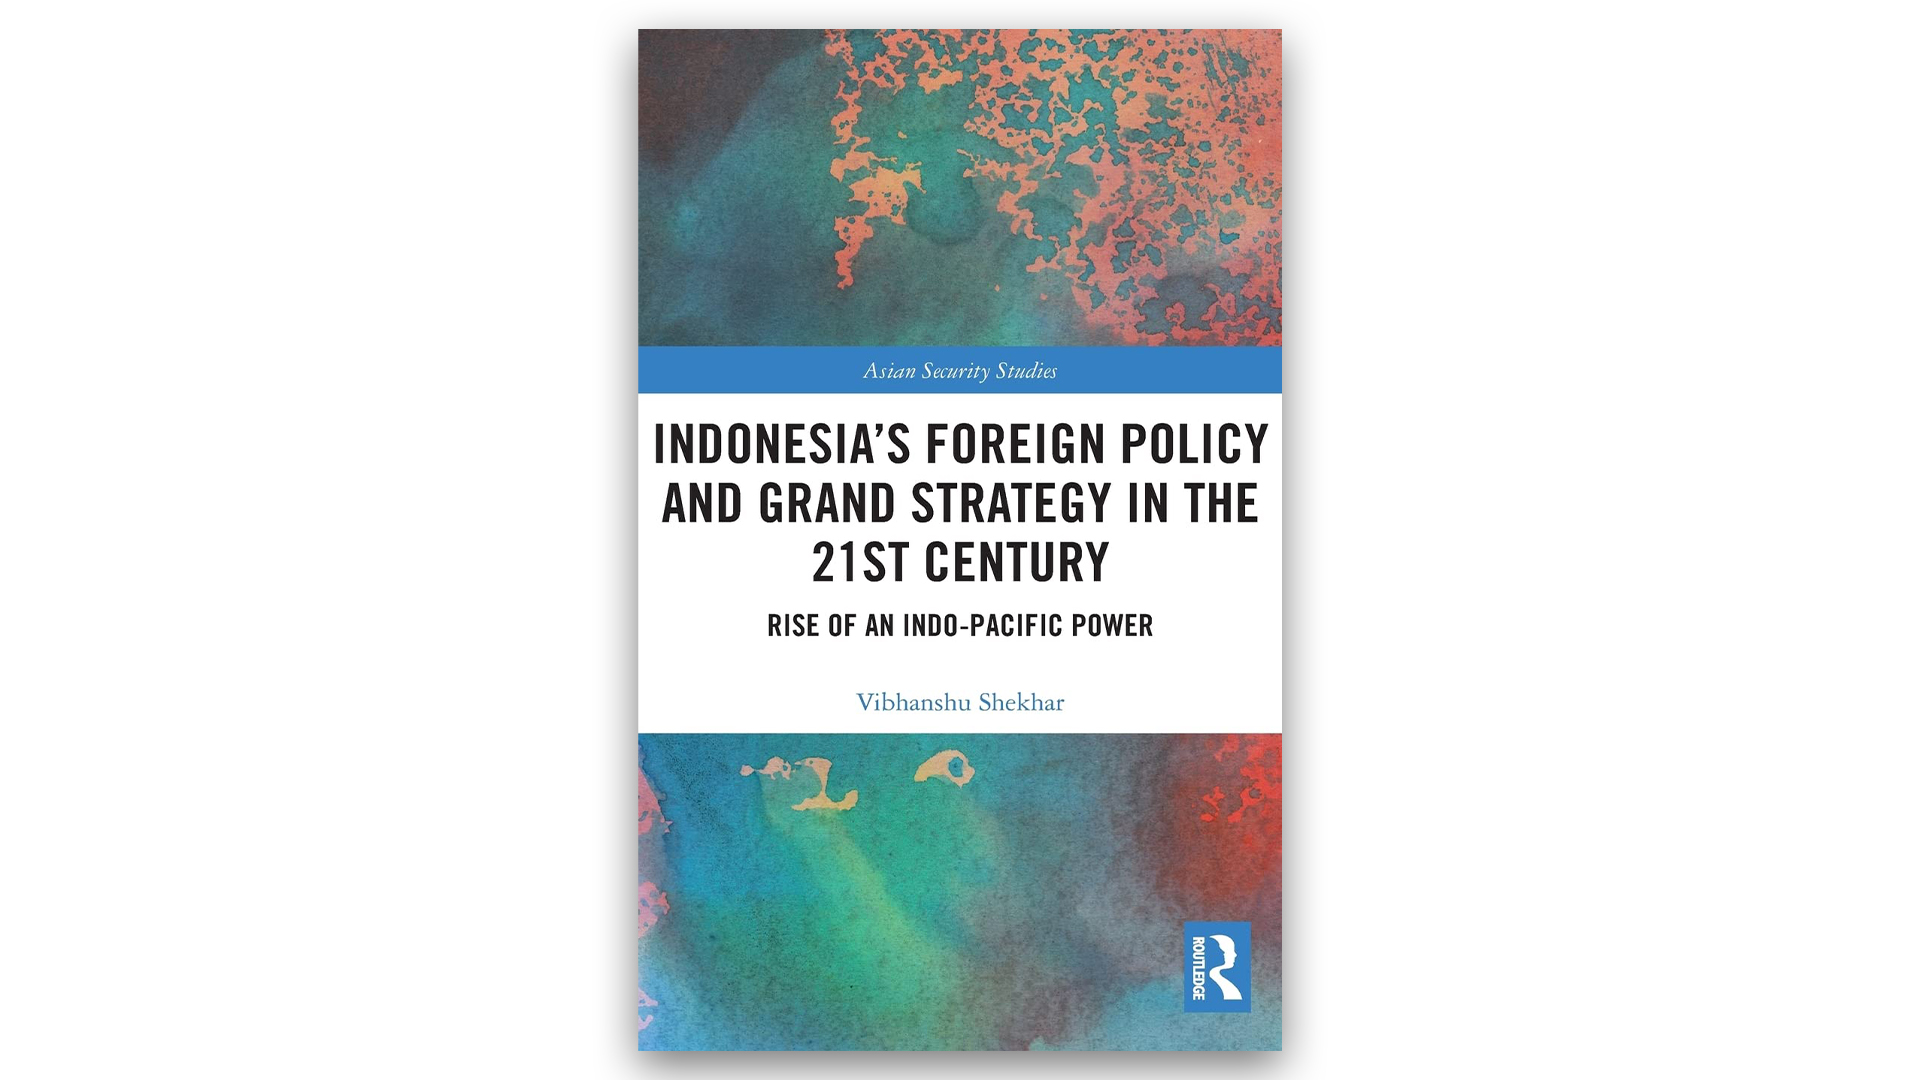 Book Review: The Rise of Indonesia Diplomatic Power